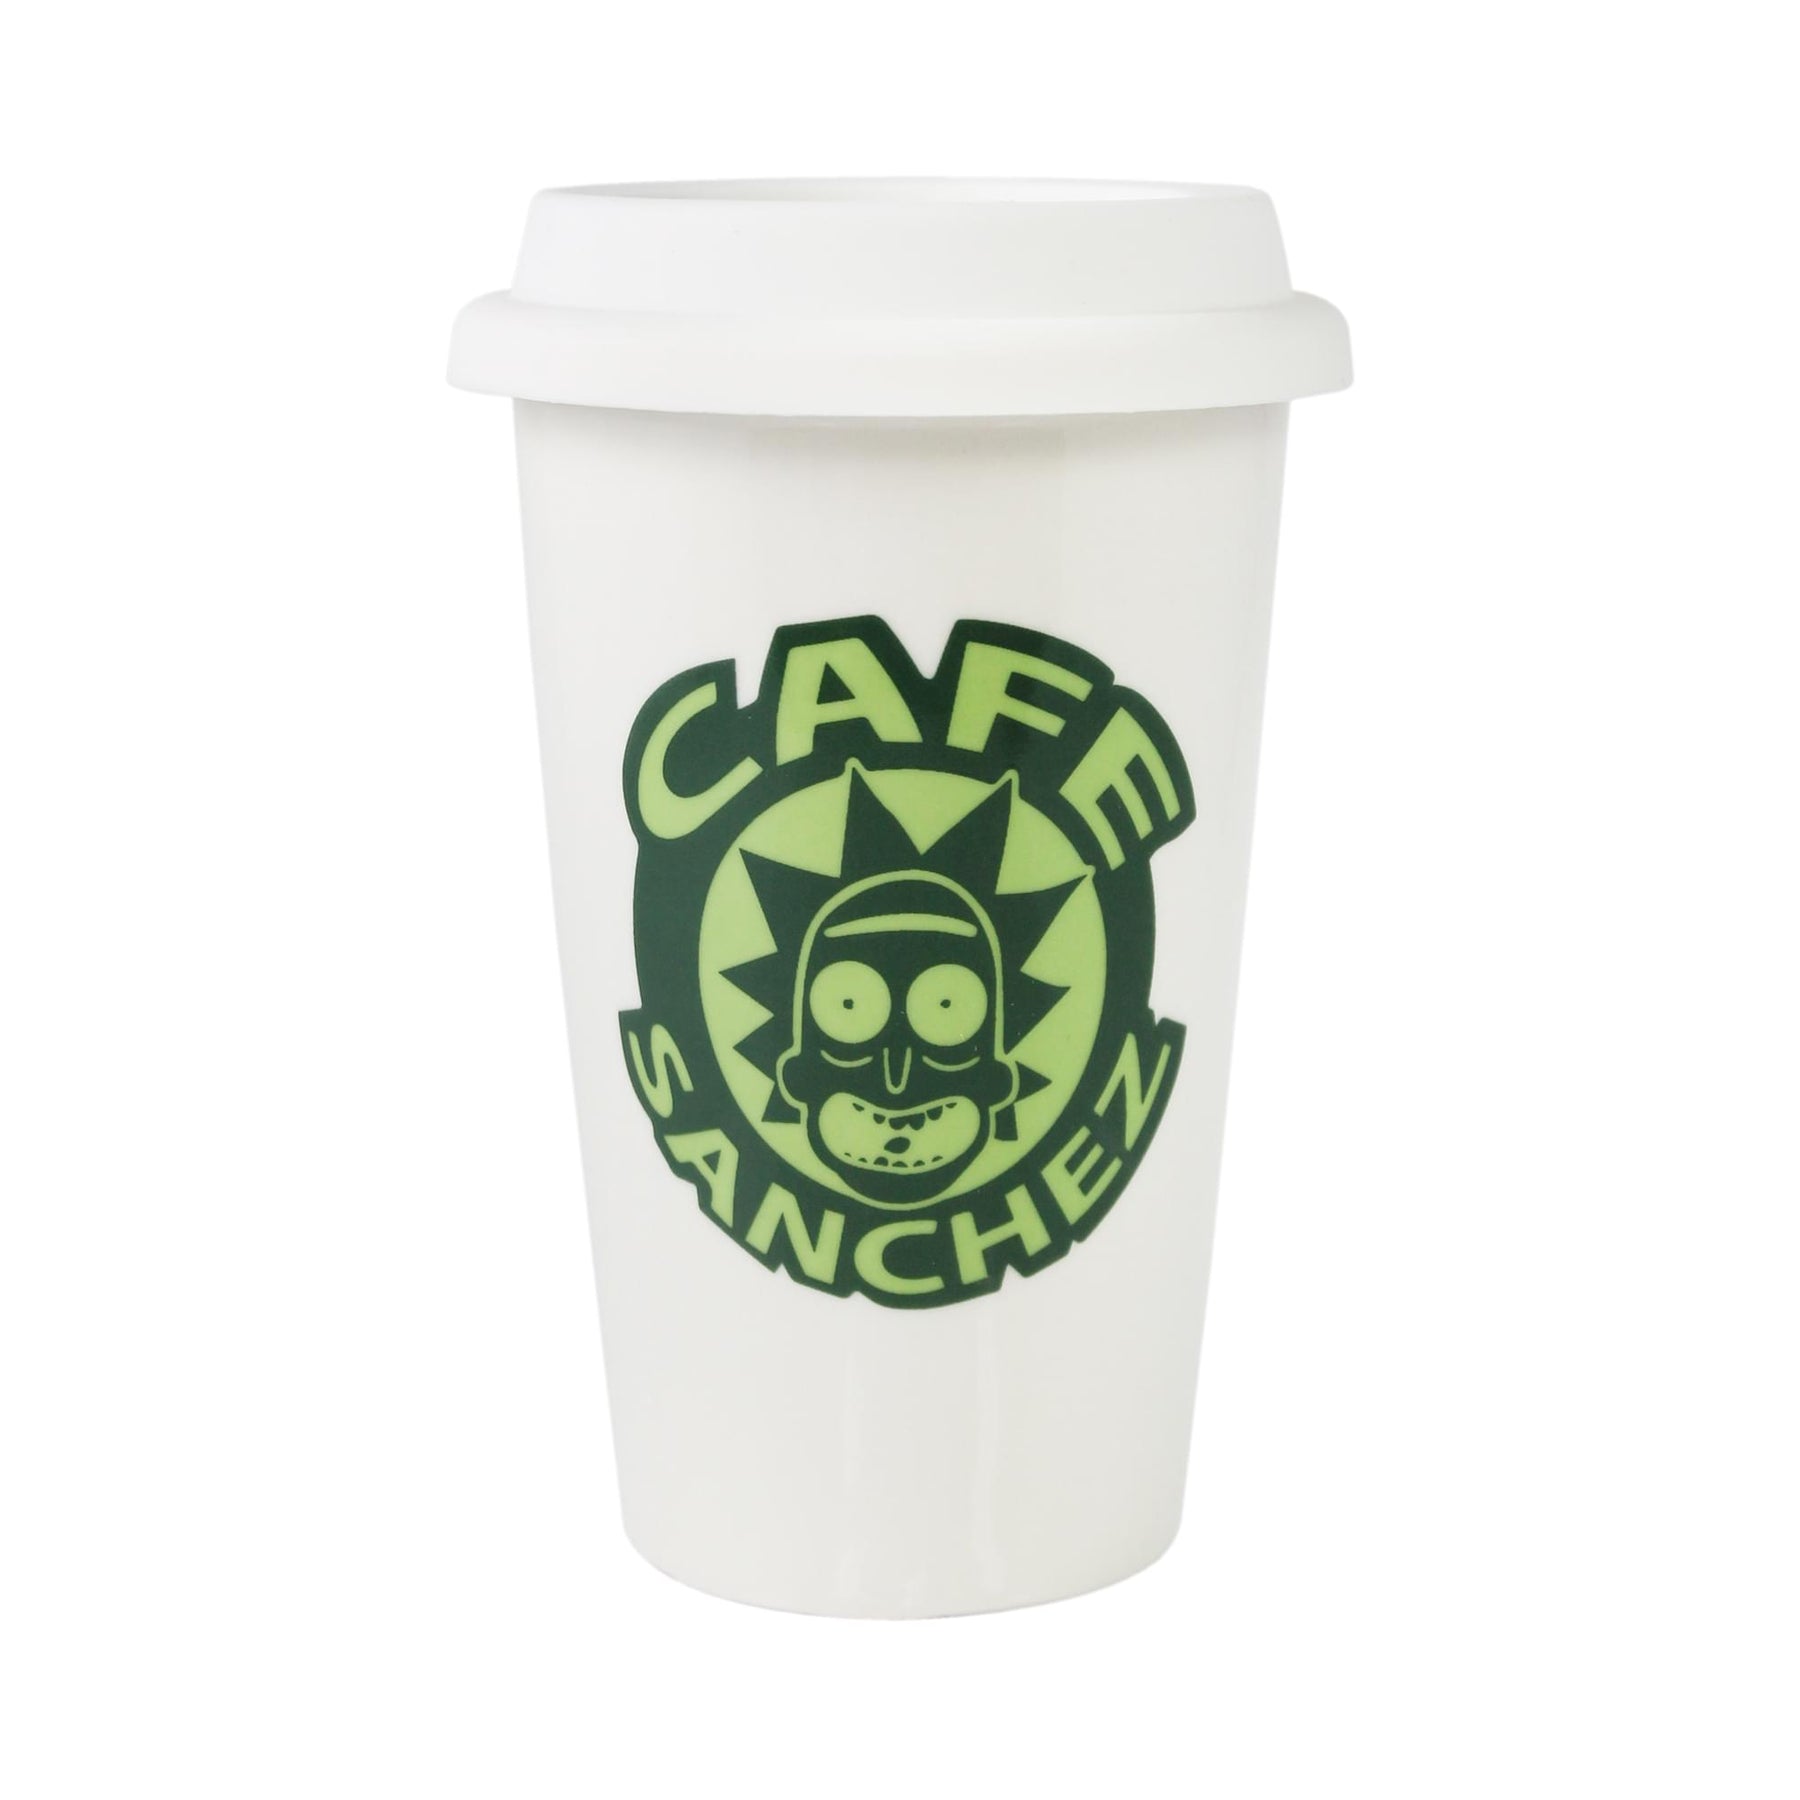 Rick and Morty Cafe Sanchez 12 Ounce Coffee Cup with Lid